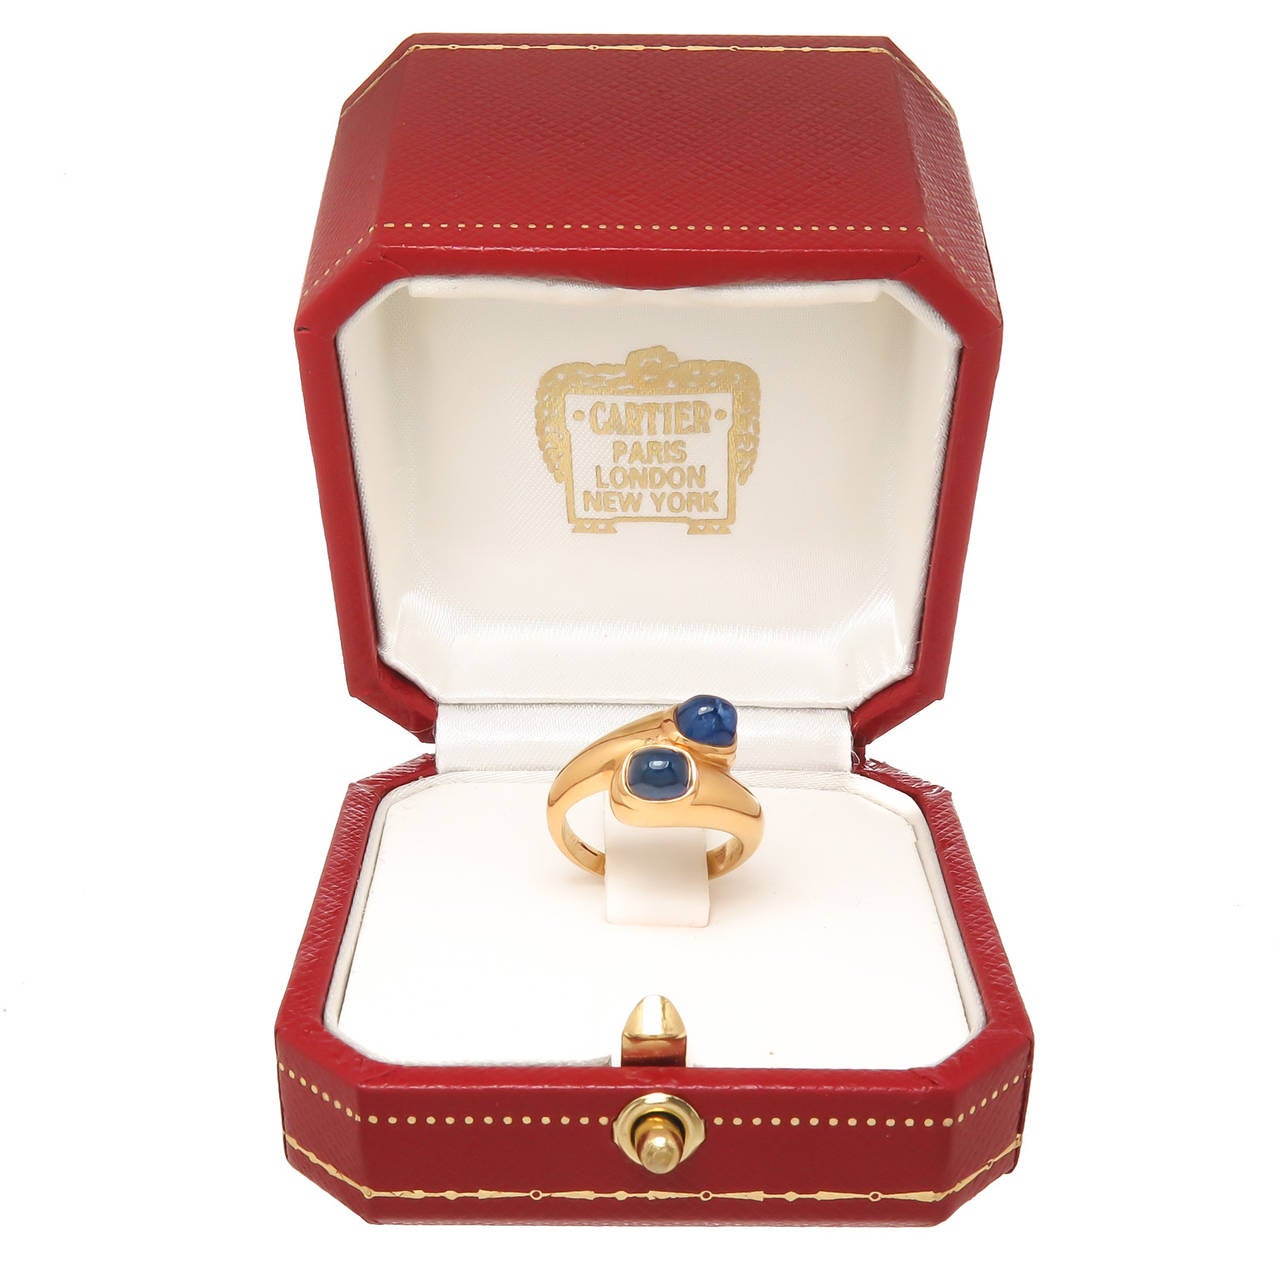 Cartier Paris 18K Yellow Gold bypass ring, set with two Domed Cabochon Sapphires of fine color possibly Burma measuring 4.5 x 3.5 x 3.5. Finger size = 4 1/2. Signed Cartier Paris and having two sets of numbers. Comes with a later Cartier